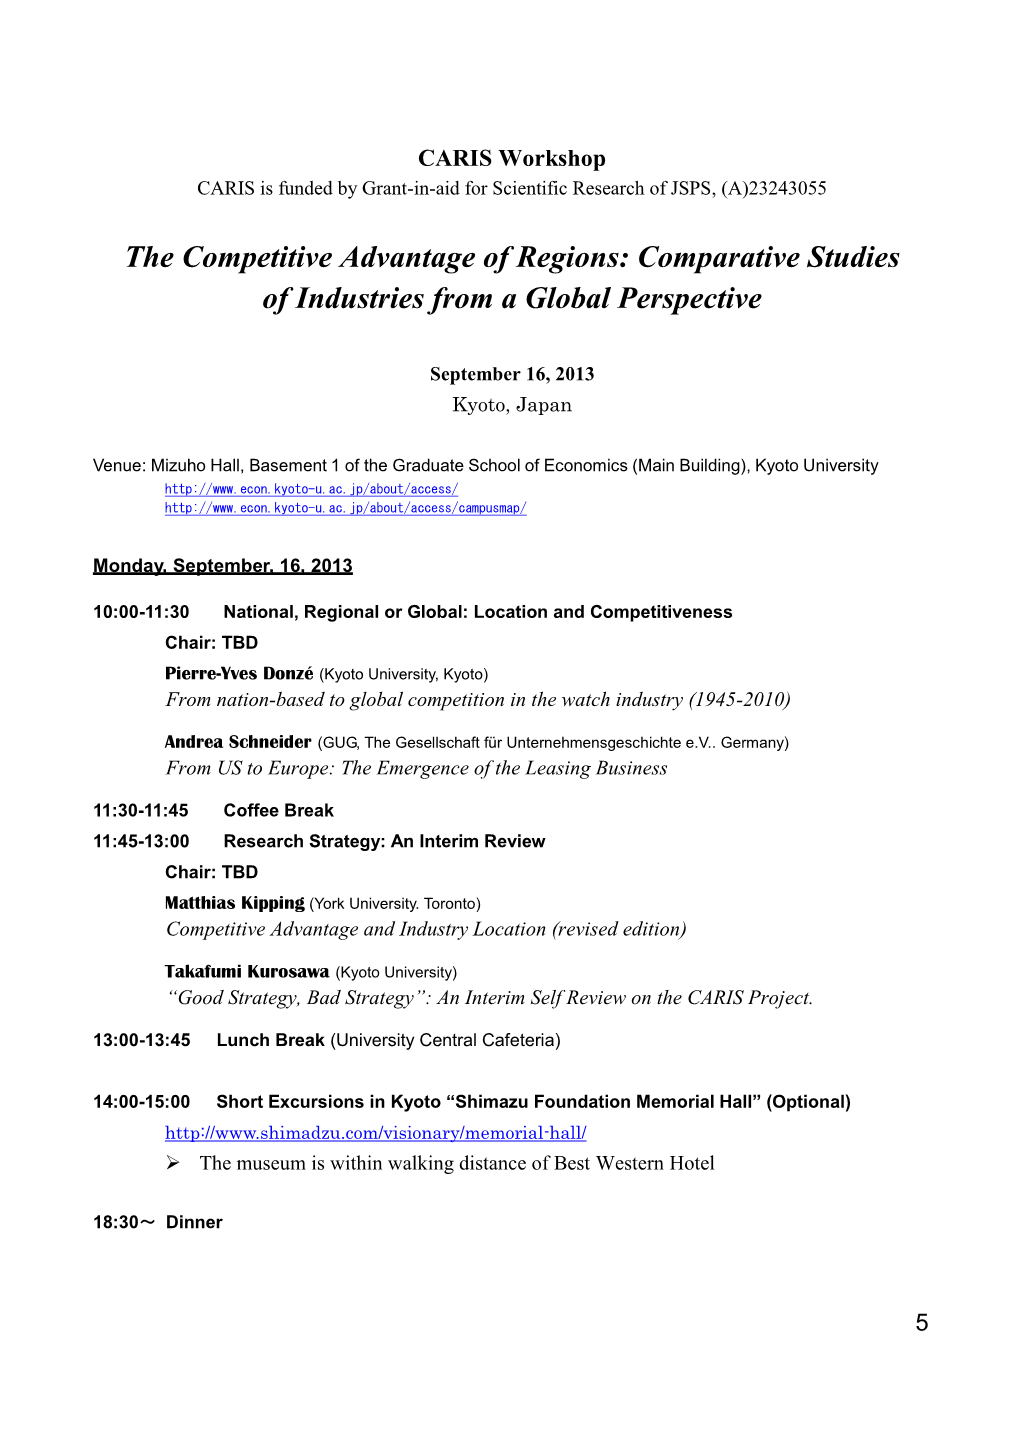 The Competitive Advantage of Regions: Comparative Studies of Industries from a Global Perspective